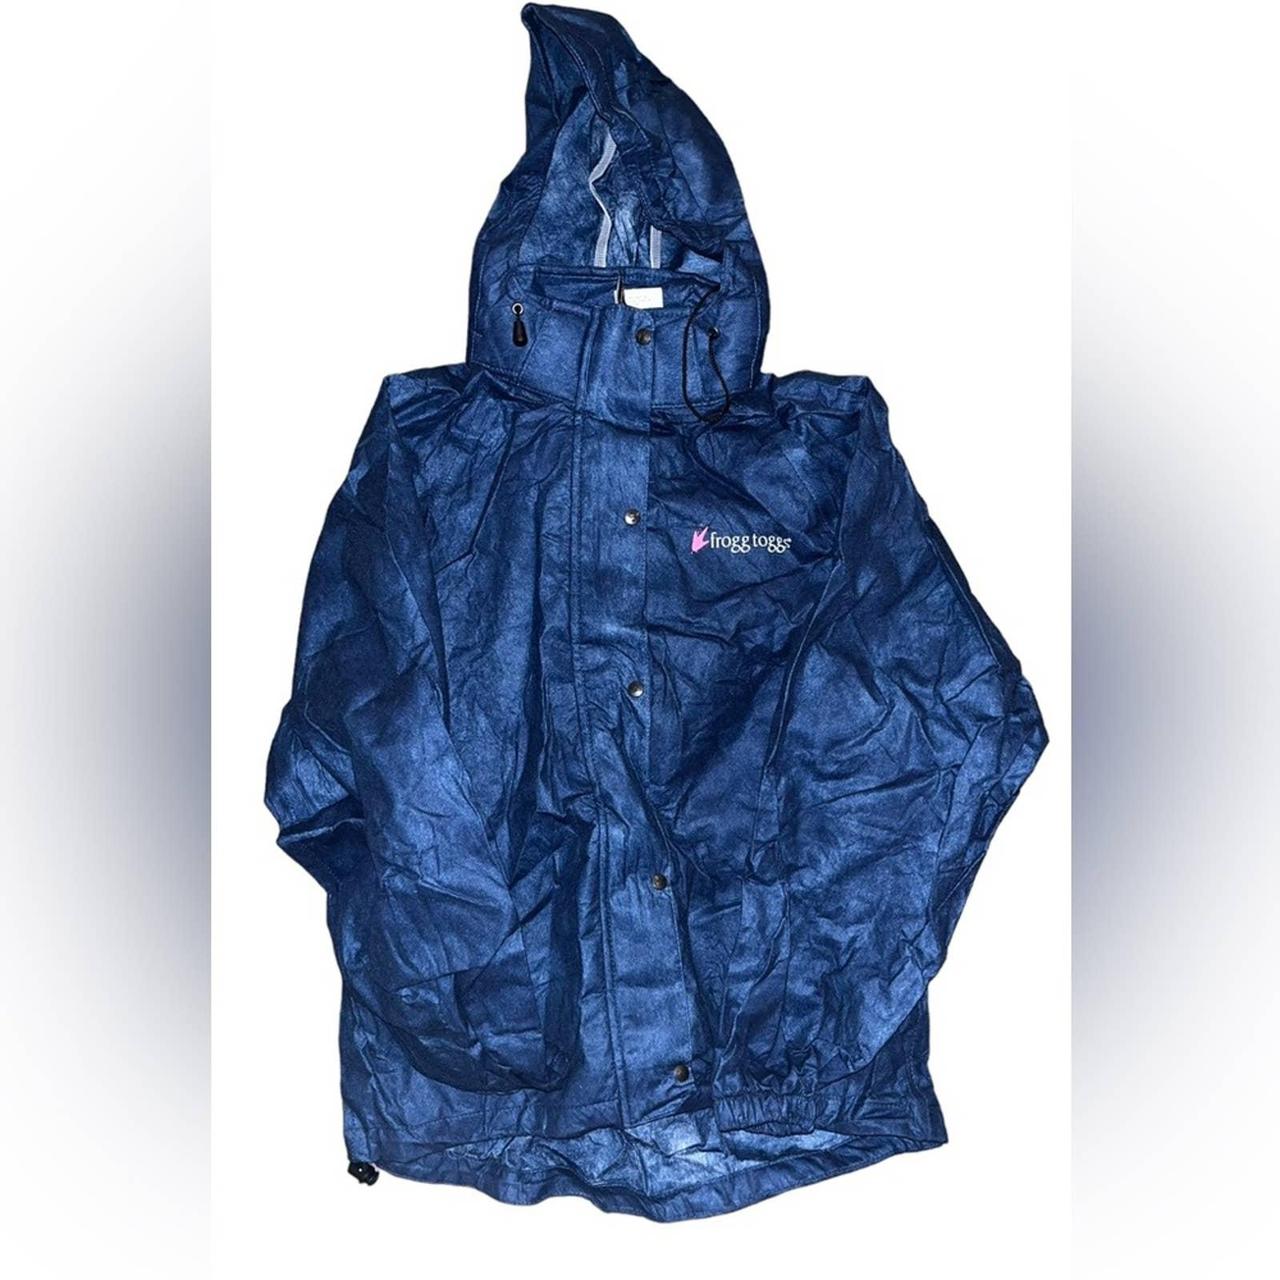 Pro Action Rain Suit - Frogg Toggs